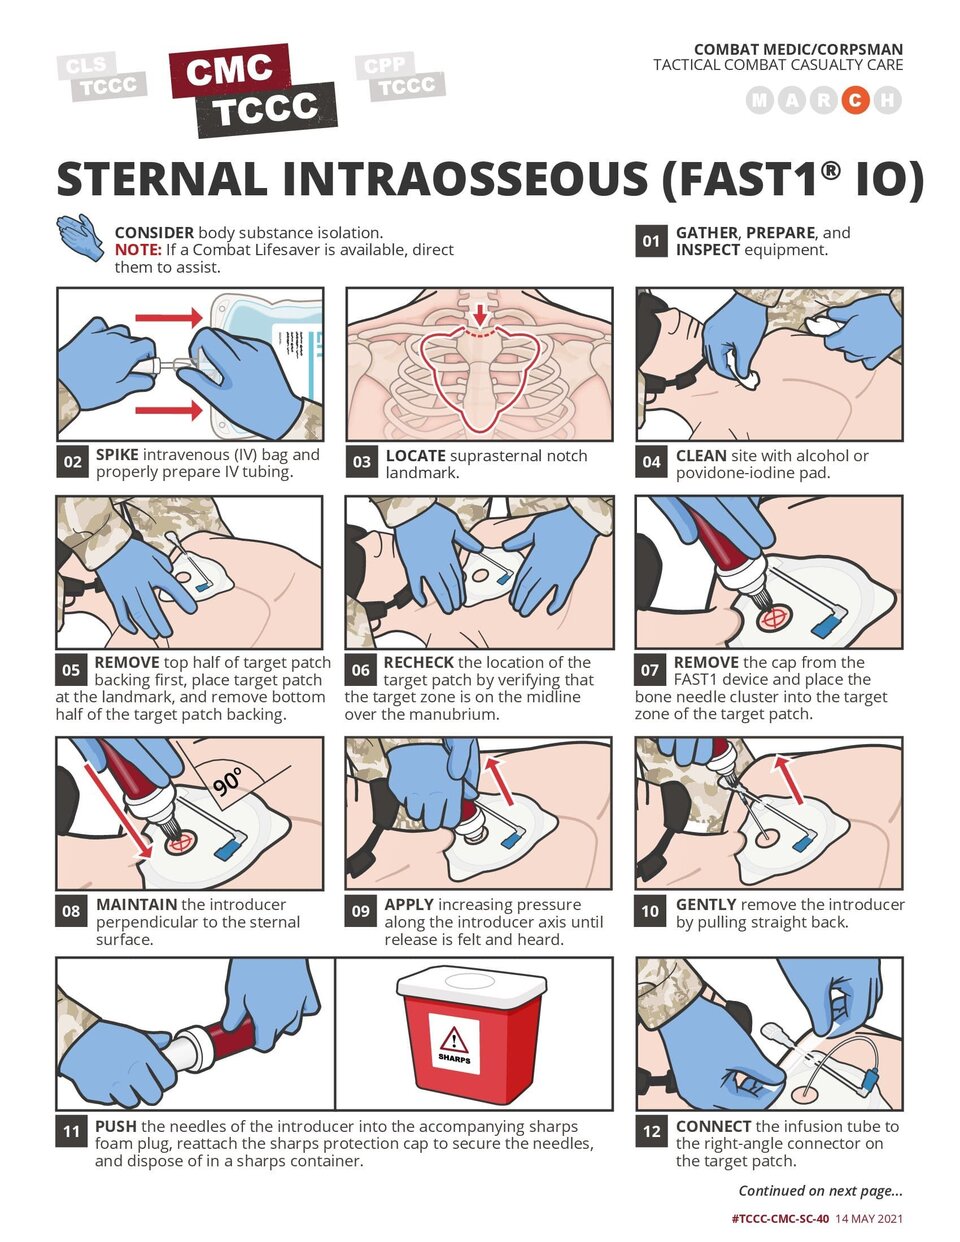 FAST1 Intraosseous Access